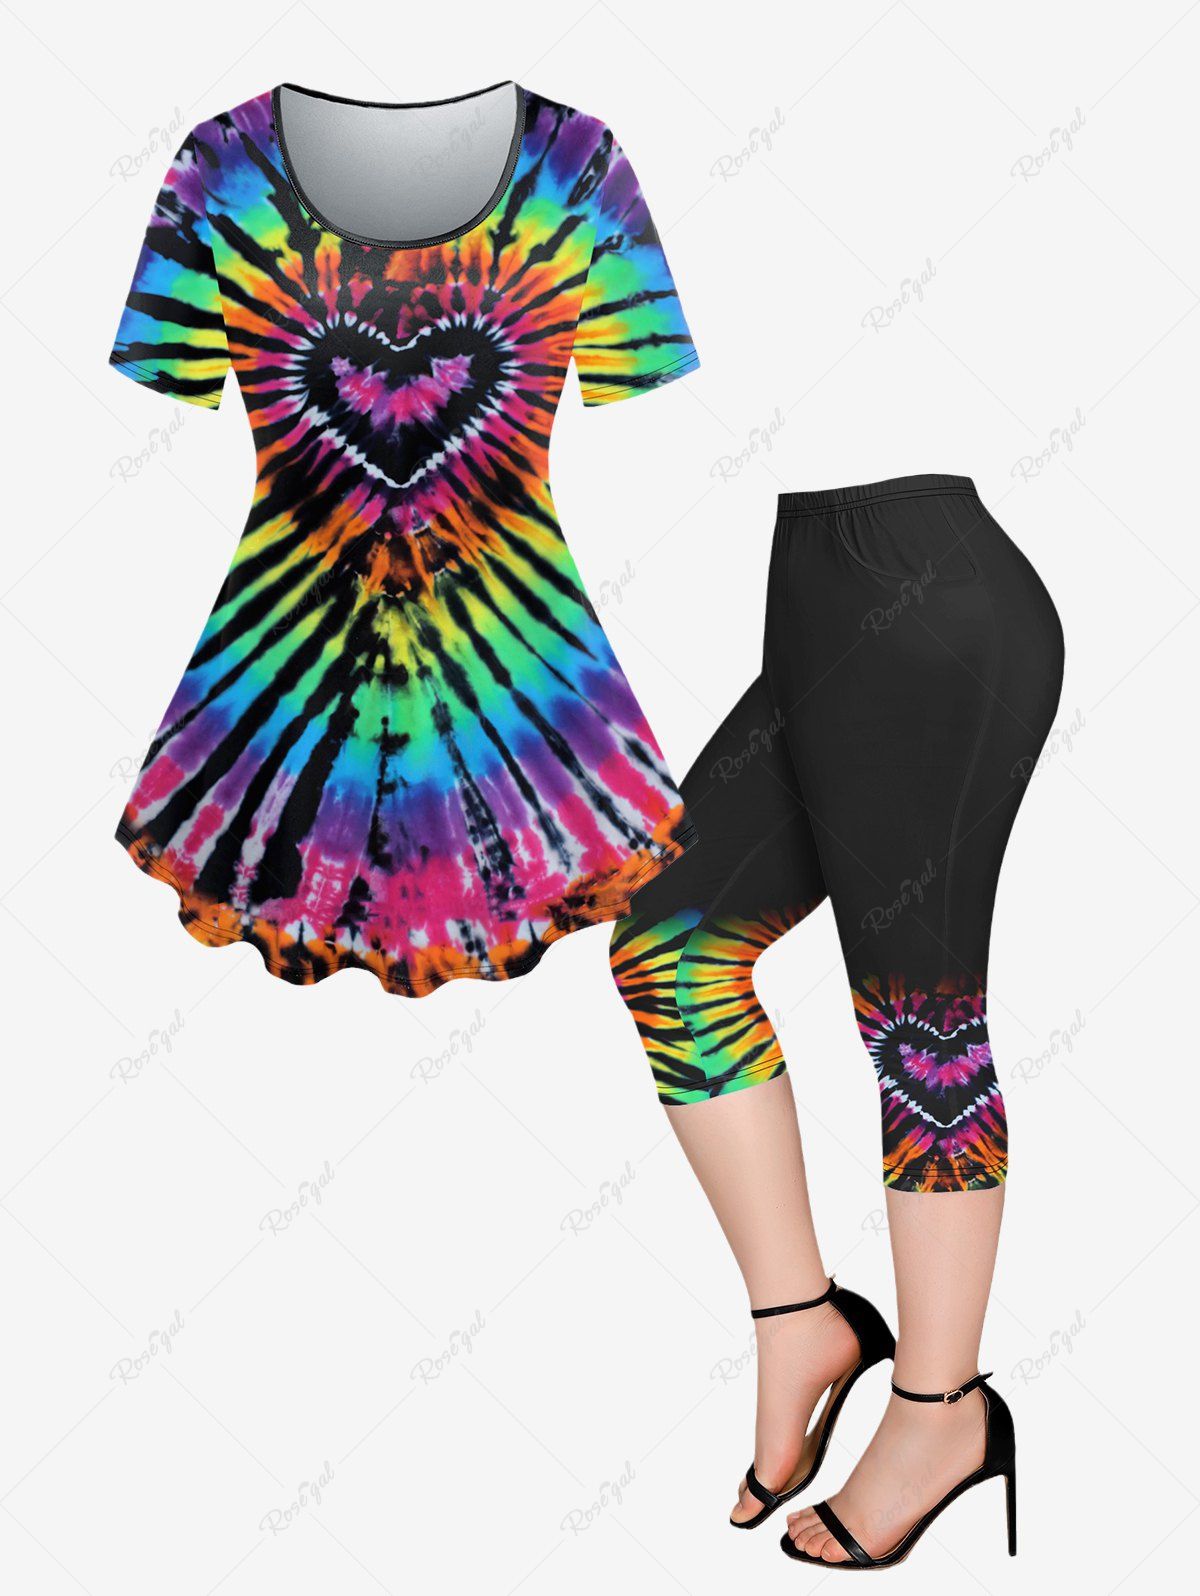 Fashion Plus Size Tie Dye Heart Printed Short Sleeves T-shirt and Leggings Outfit  